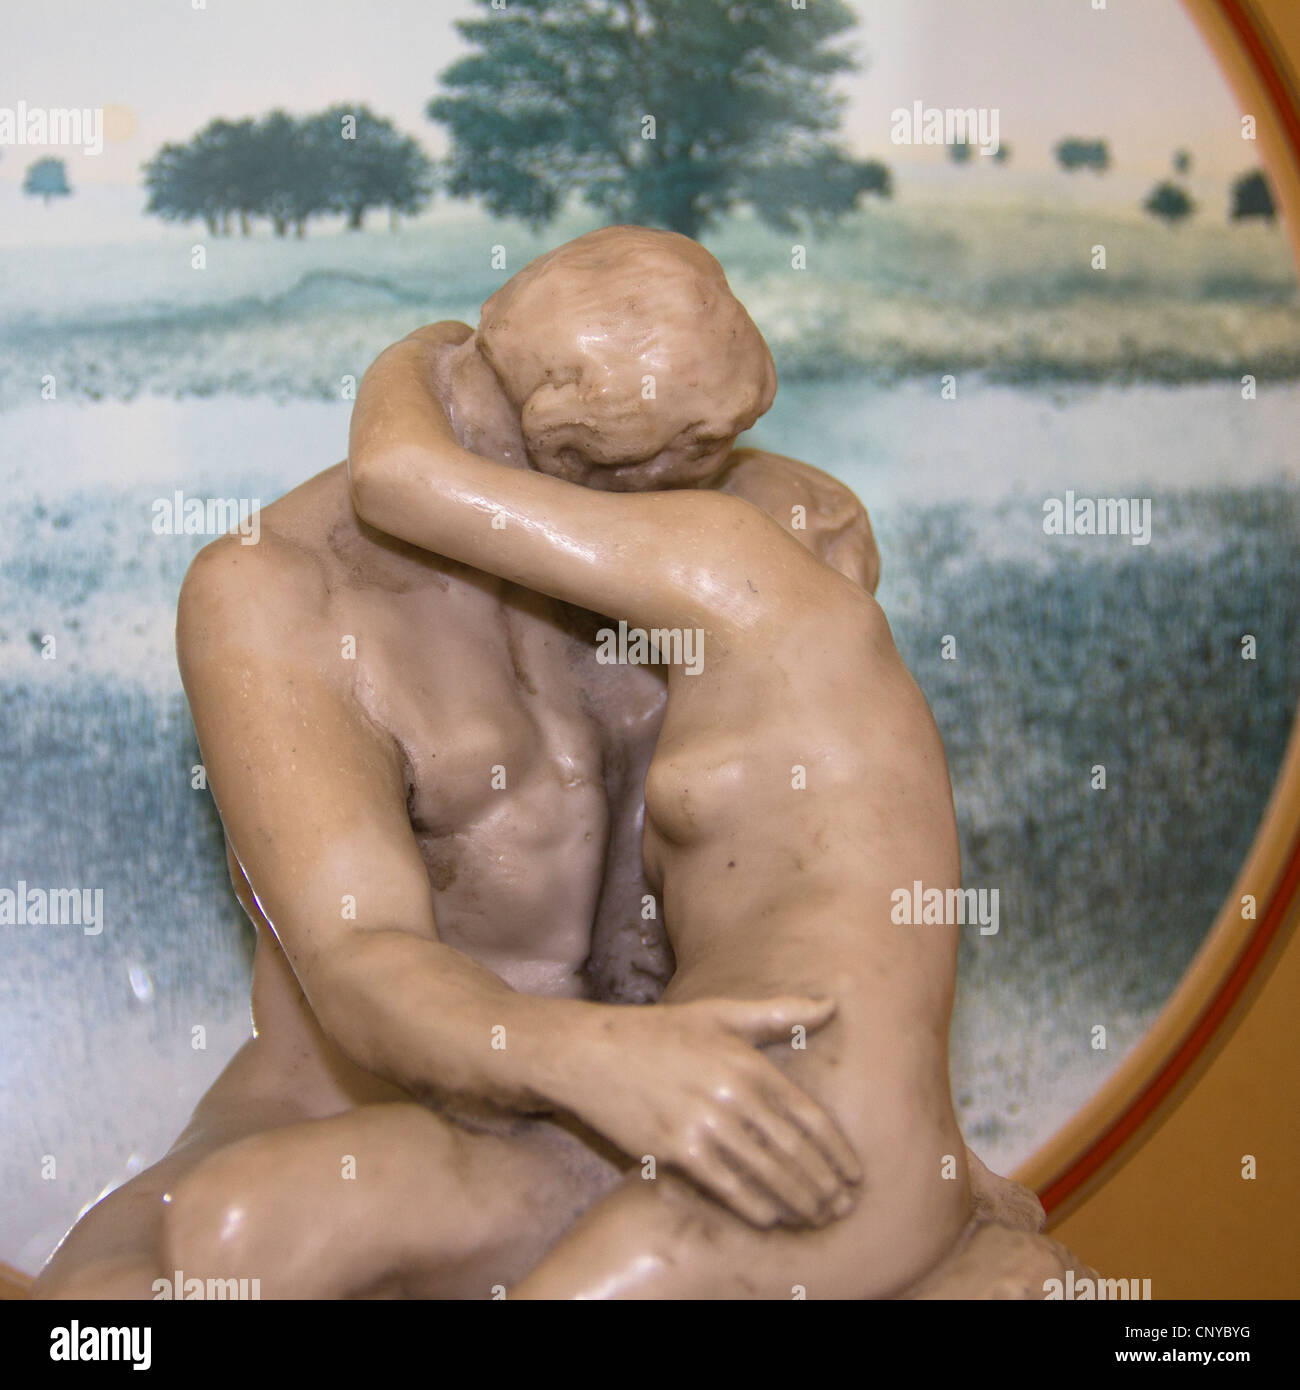 Little statue of Rodin's Kiss as Home decor Stock Photo